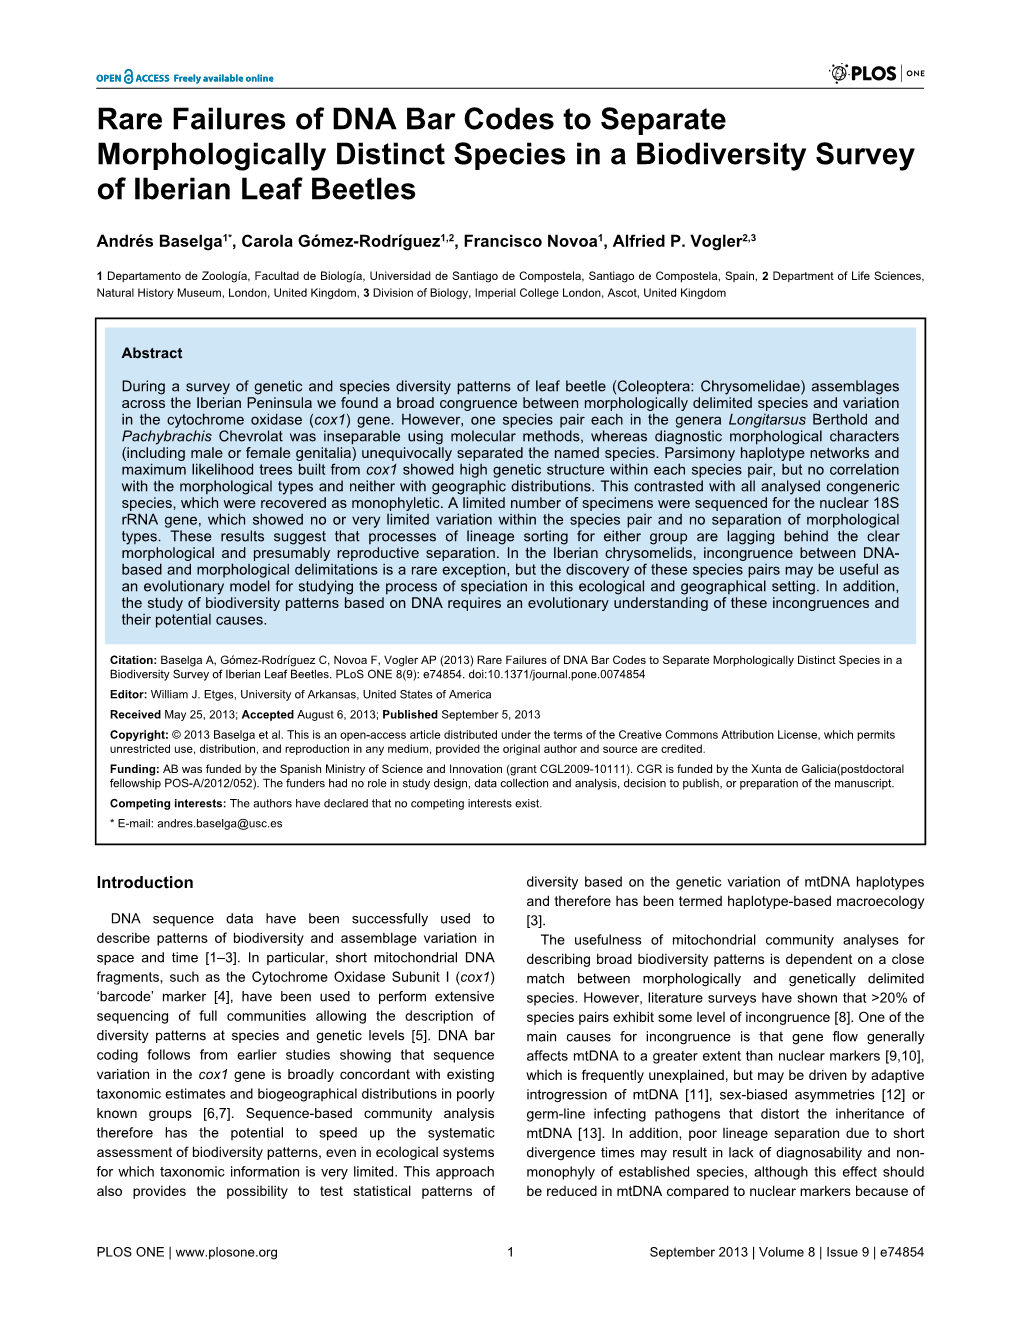 Rare Failures of DNA Bar Codes to Separate Morphologically Distinct Species in a Biodiversity Survey of Iberian Leaf Beetles